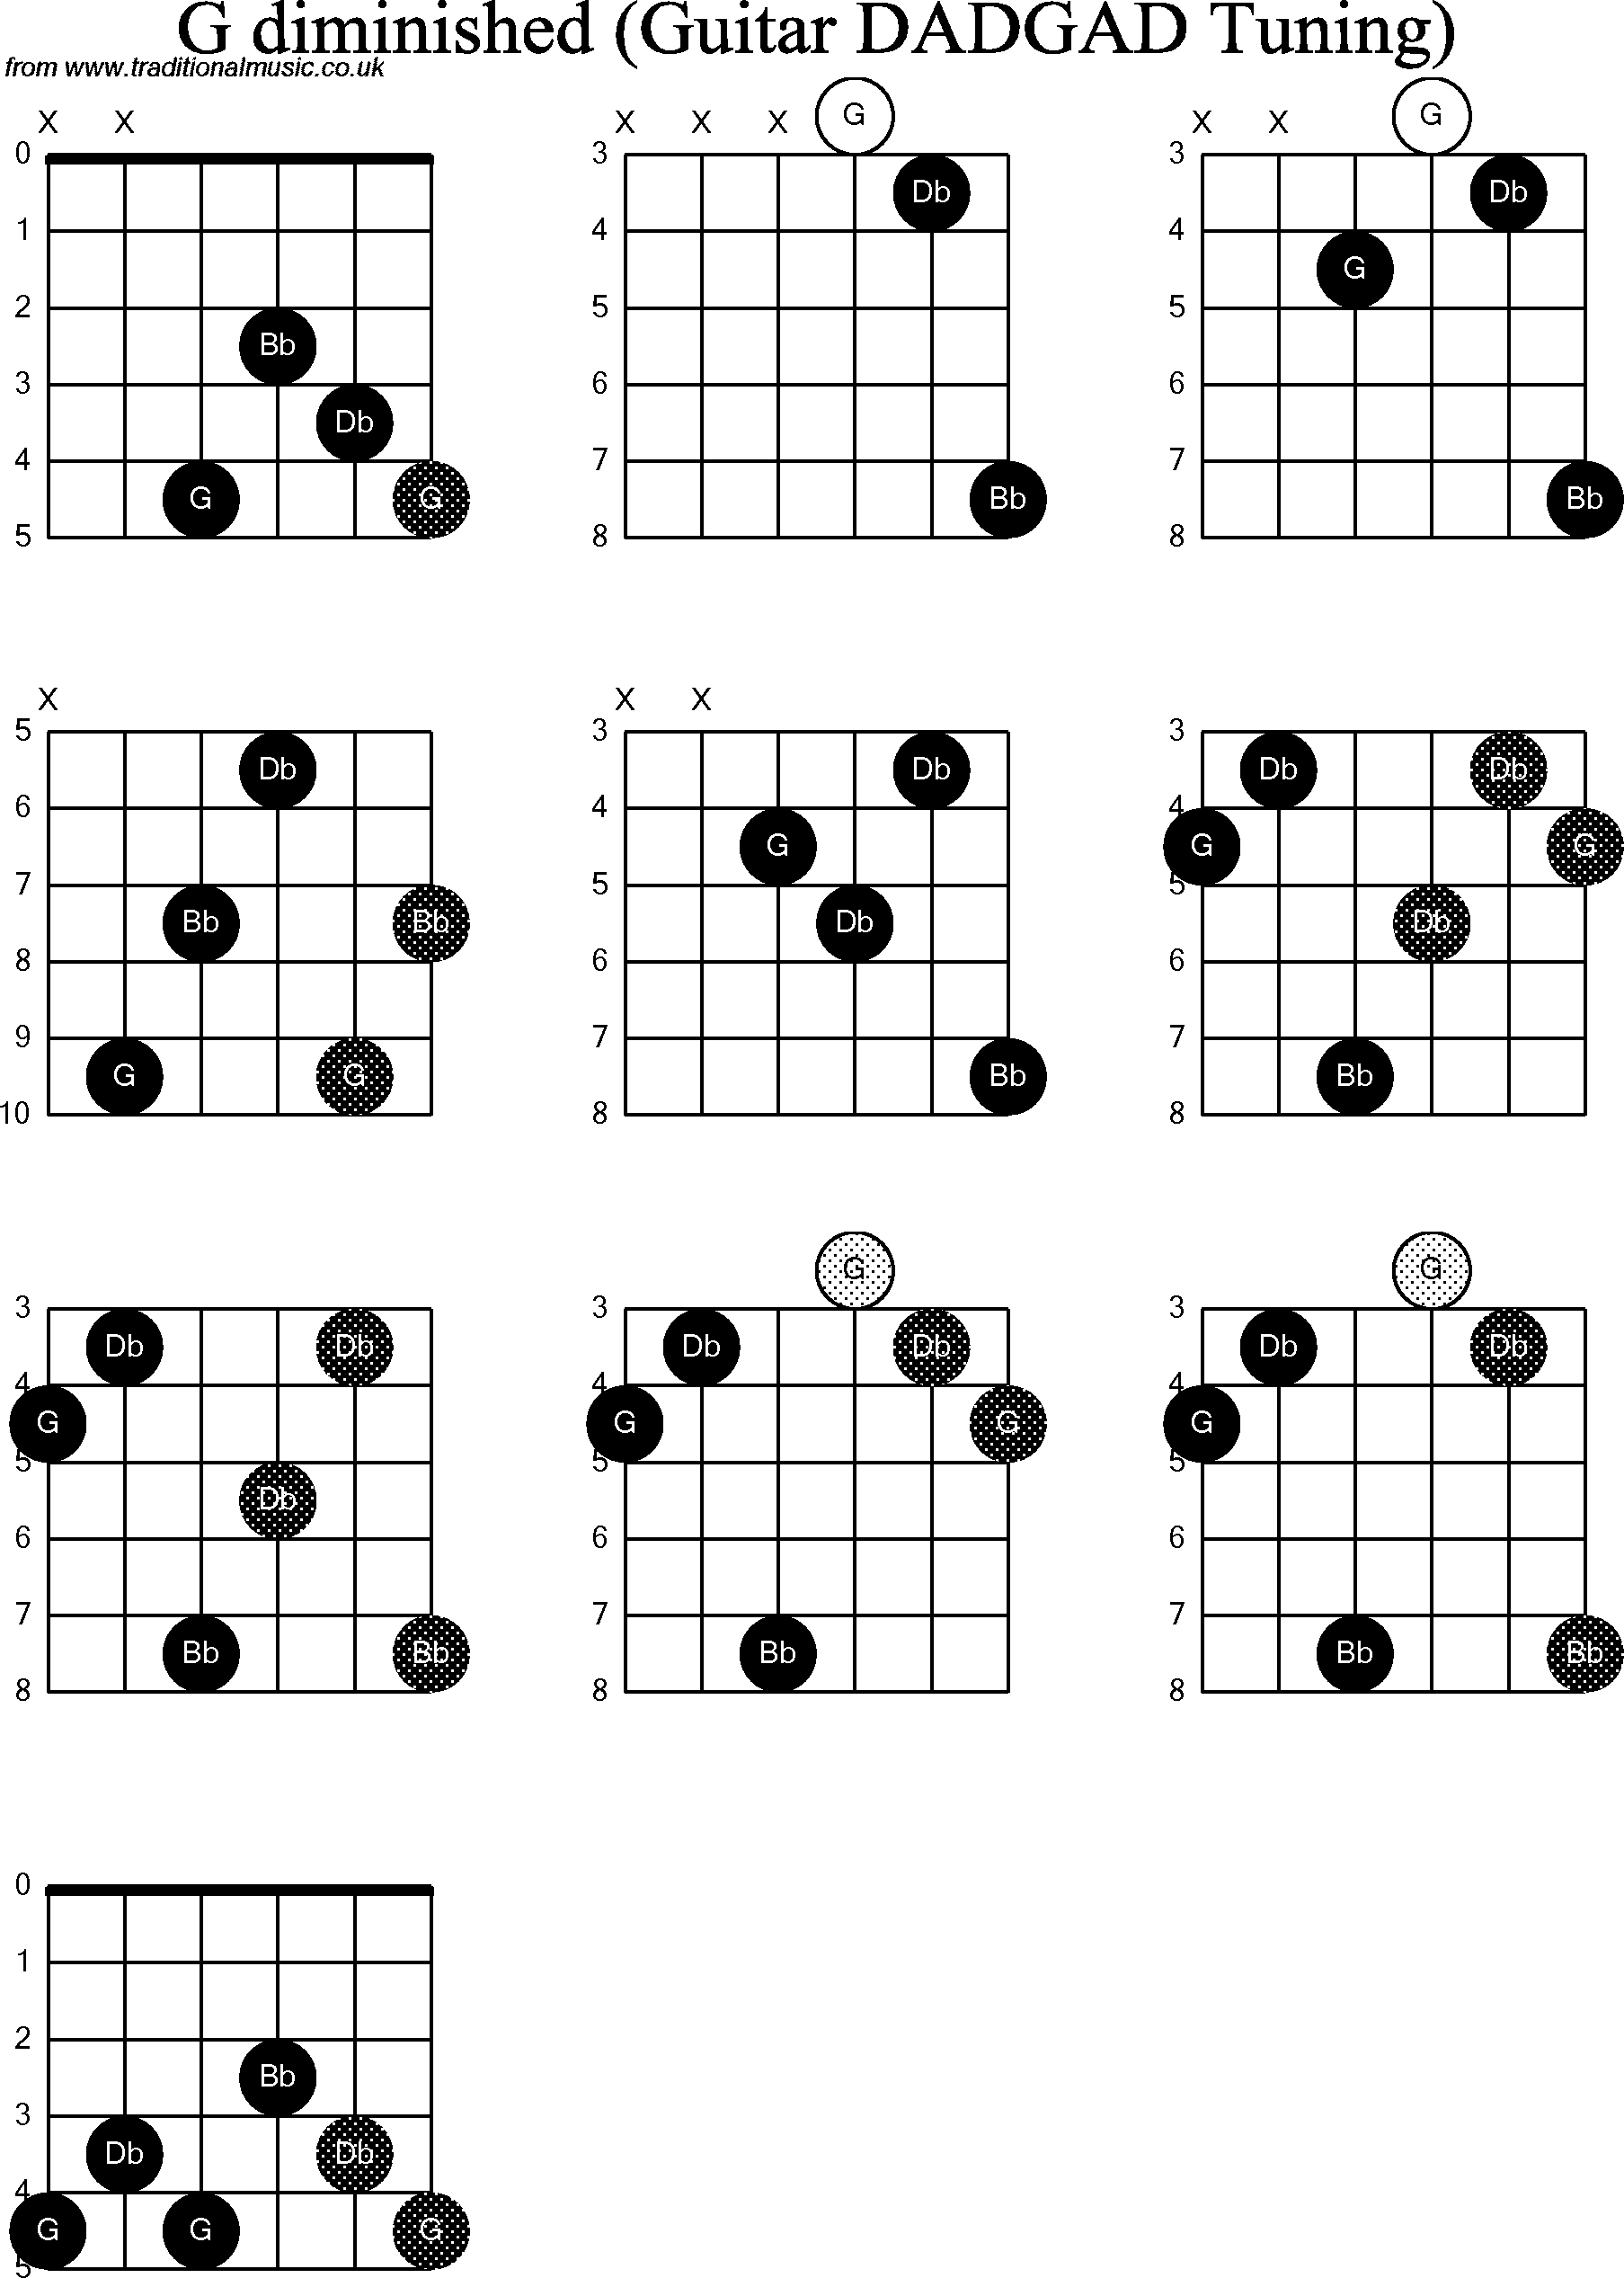 Chord Diagrams for D Modal Guitar(DADGAD), G Diminished